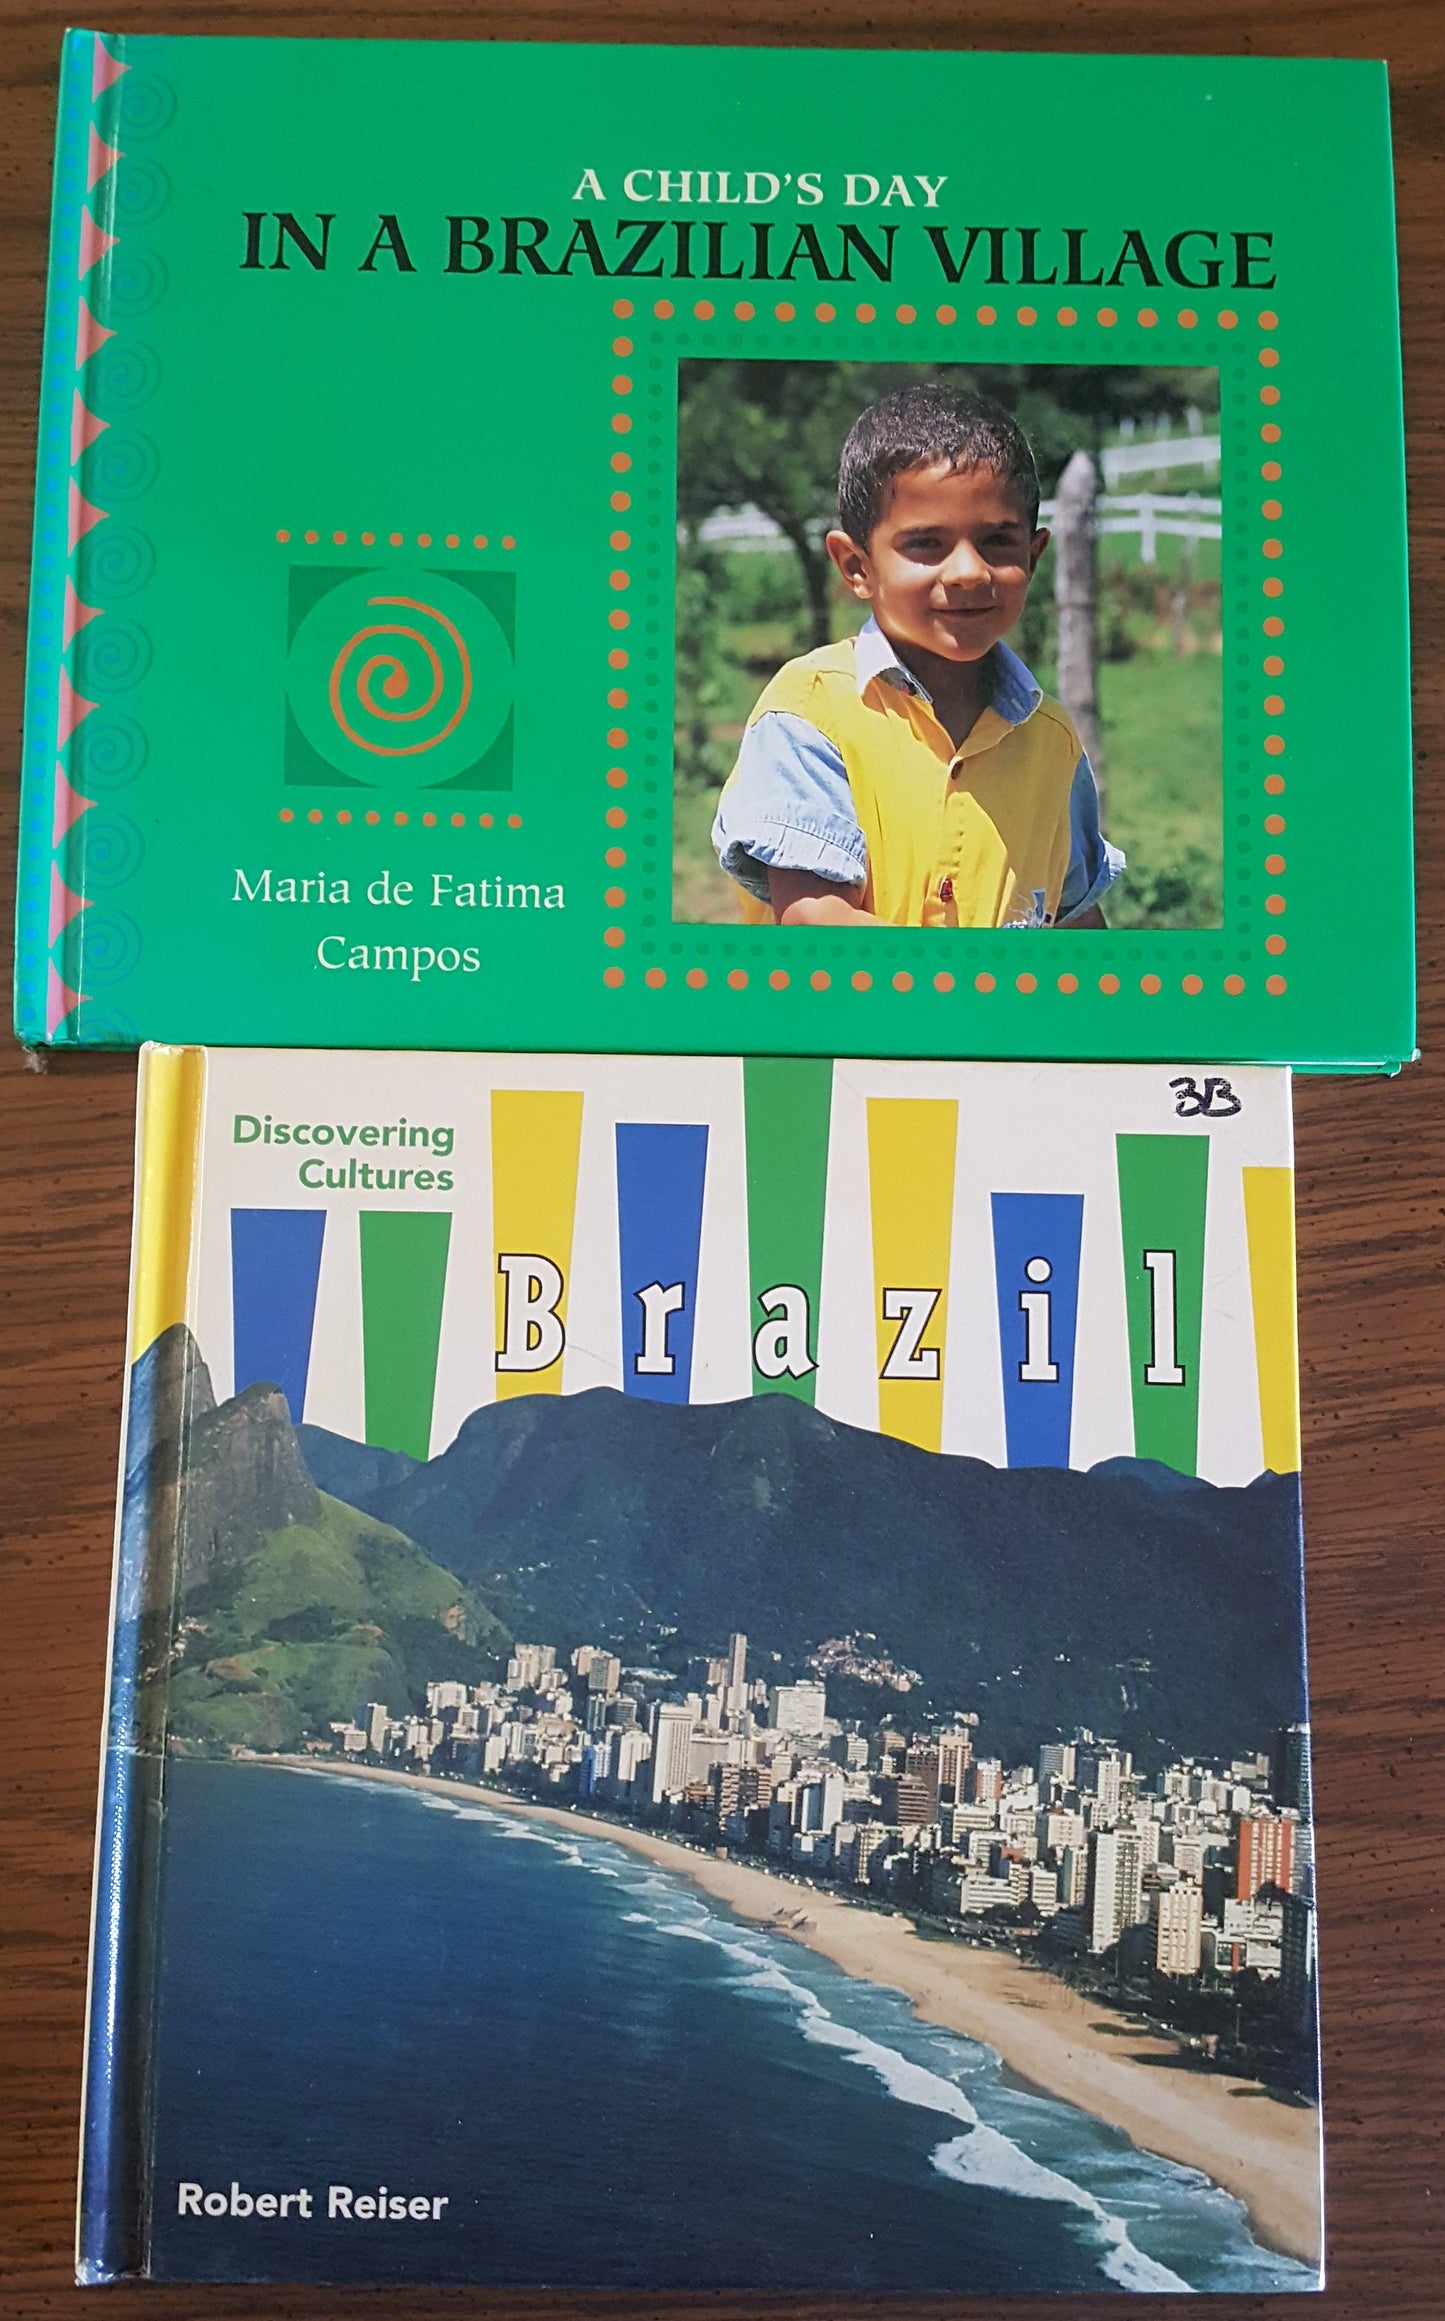 Brazil 2 book set - A Child's Day in a Brazilian Village  &  Brazil Discovering Cultures